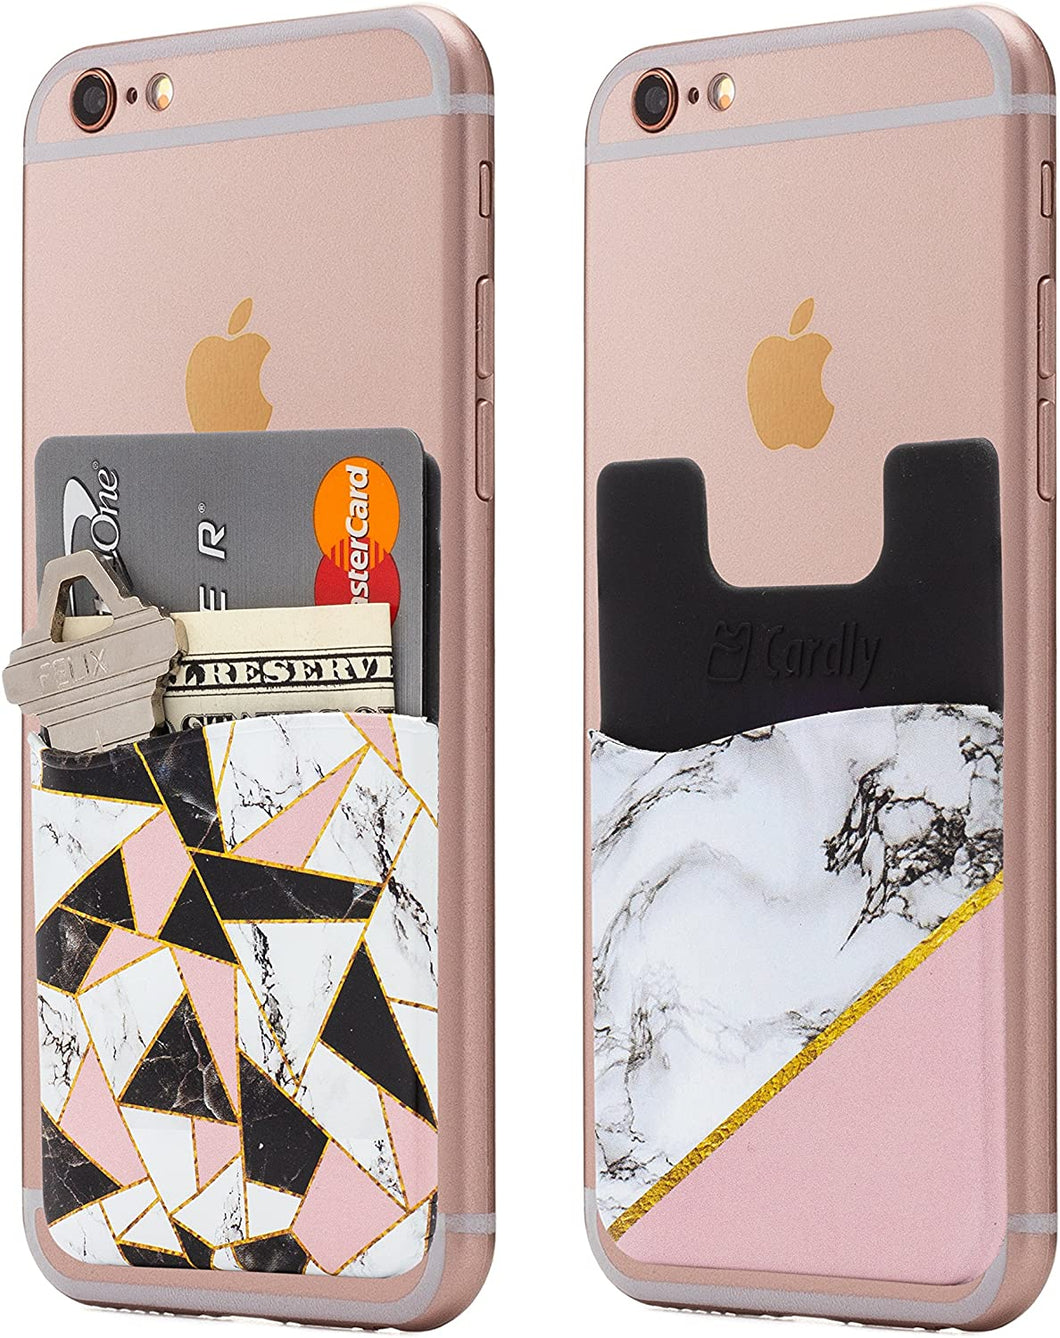 (Two) Marble Cell Phone Stick on Wallet Card Holder Phone Pocket for iPhone, Android and All Smartphones (Shattered)